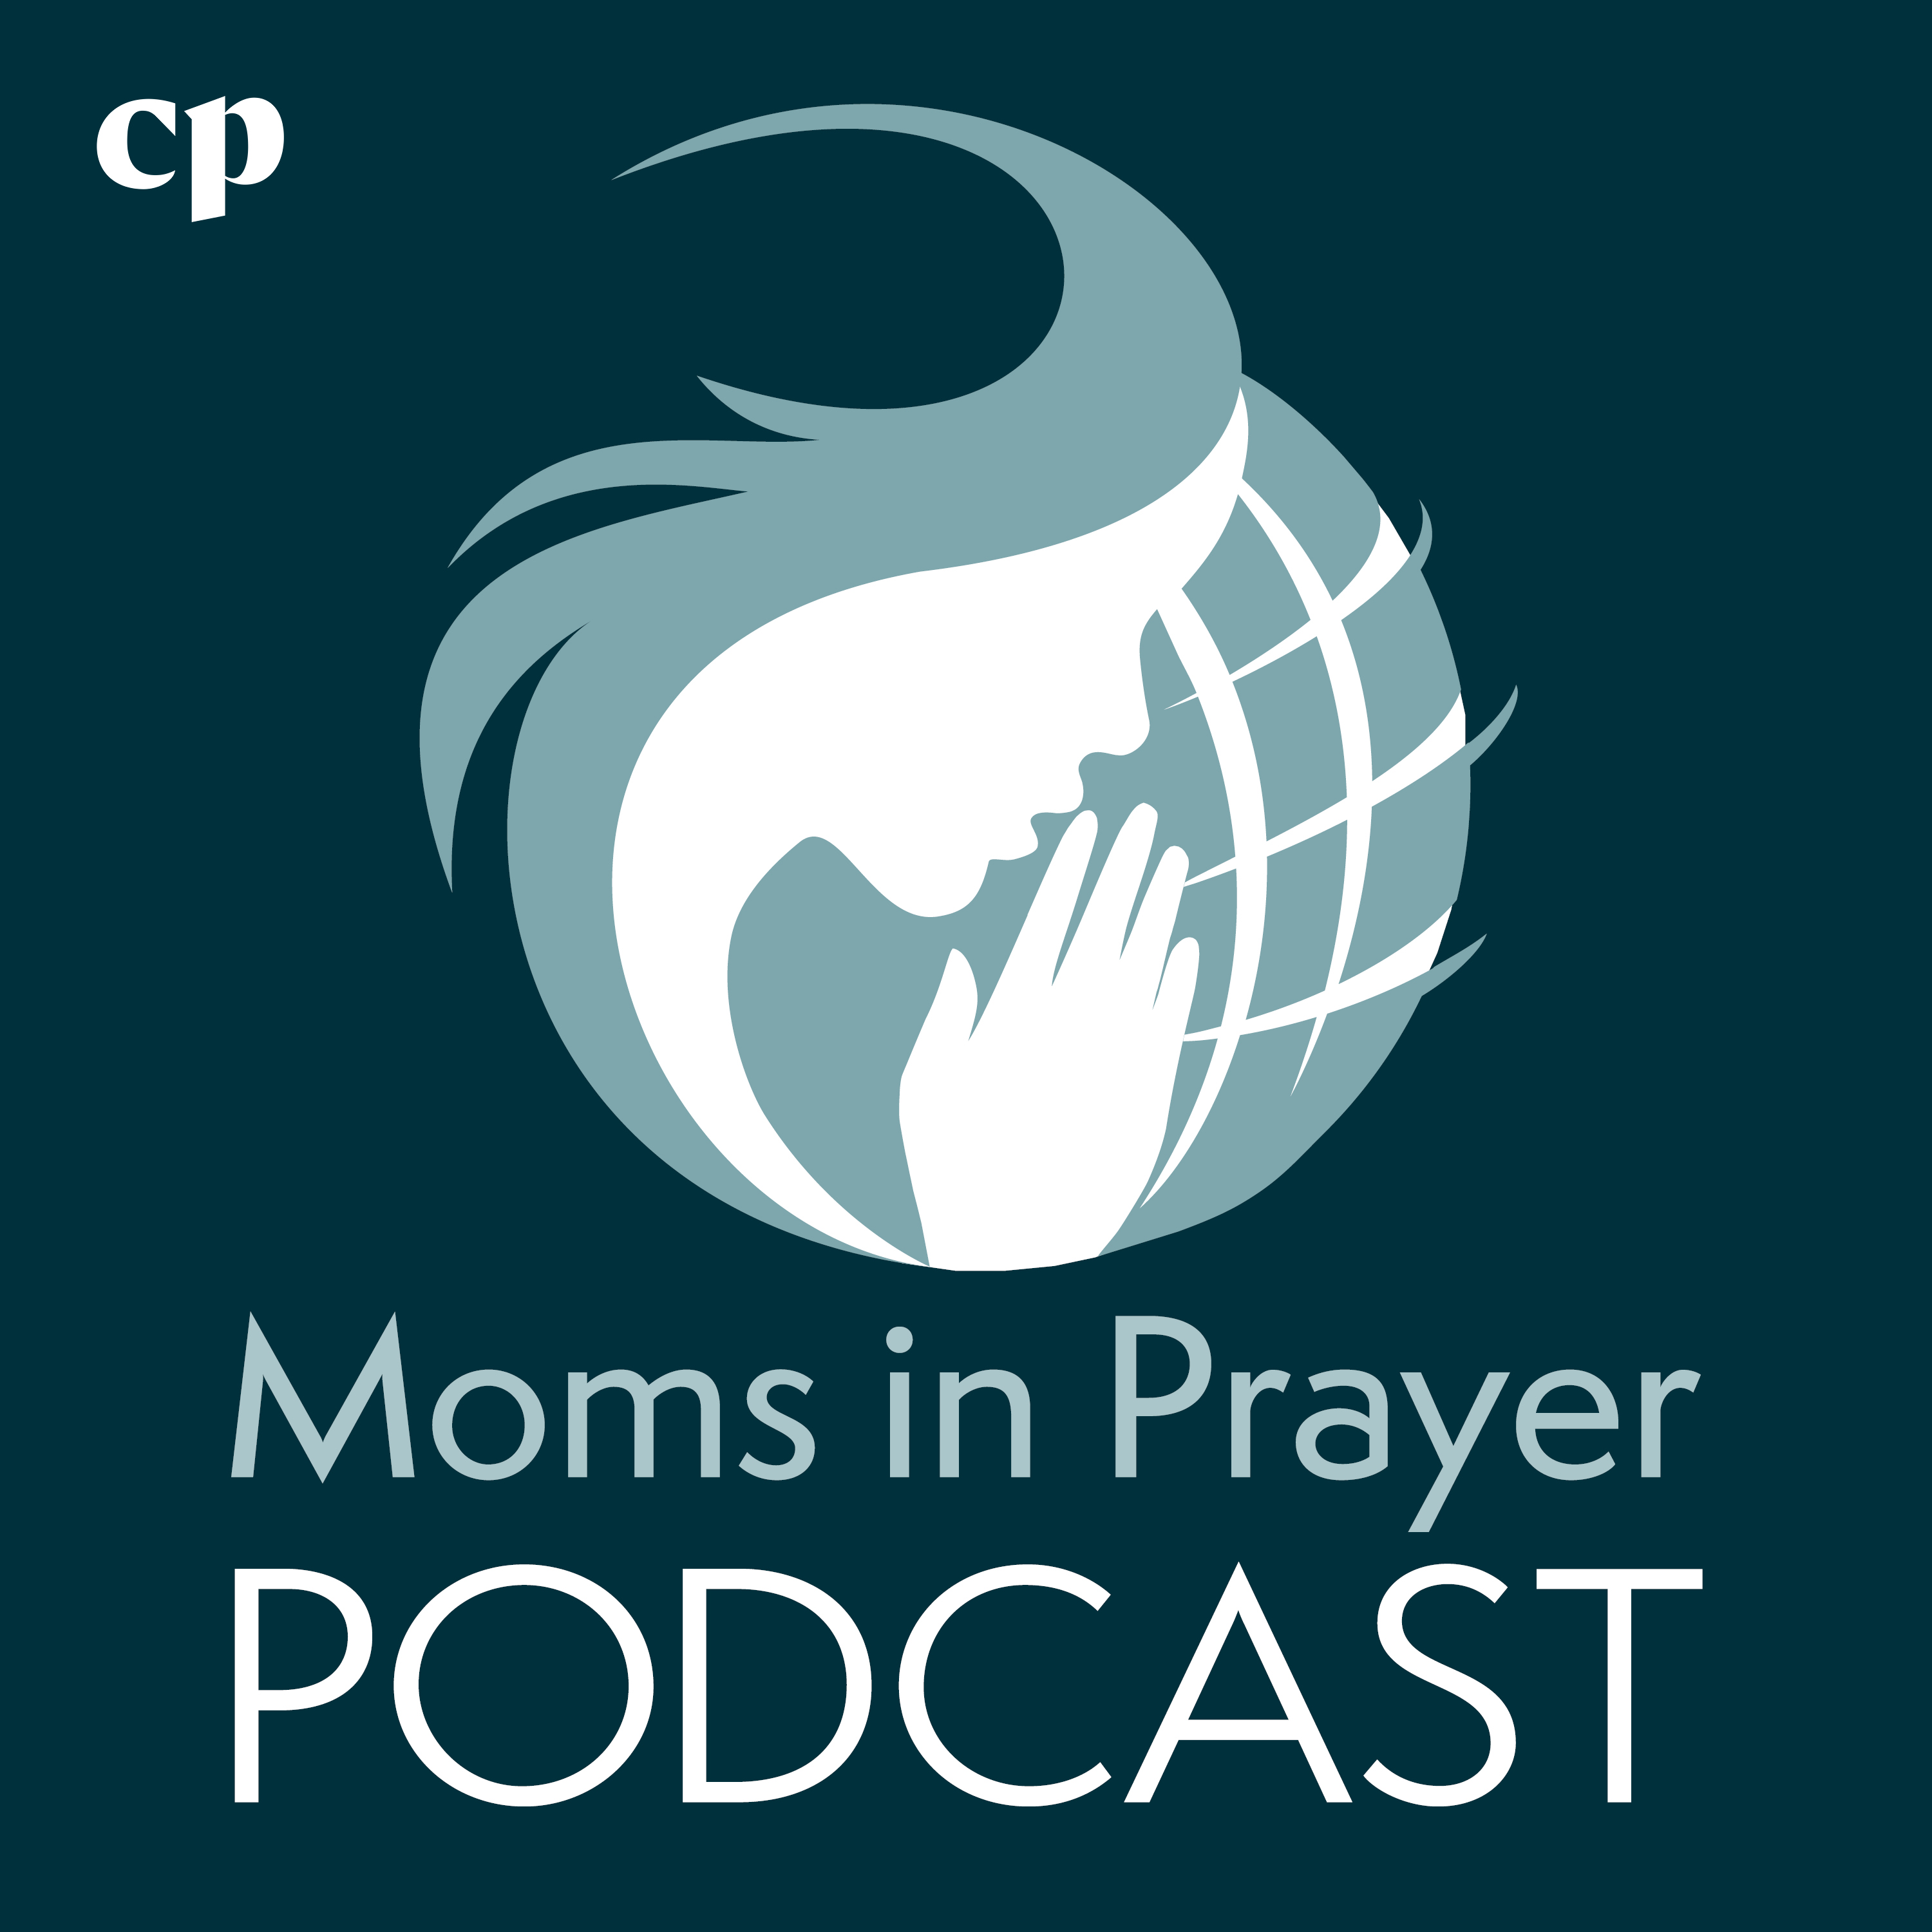 Episode 128 - How Moms in Prayer Can Impact Churches